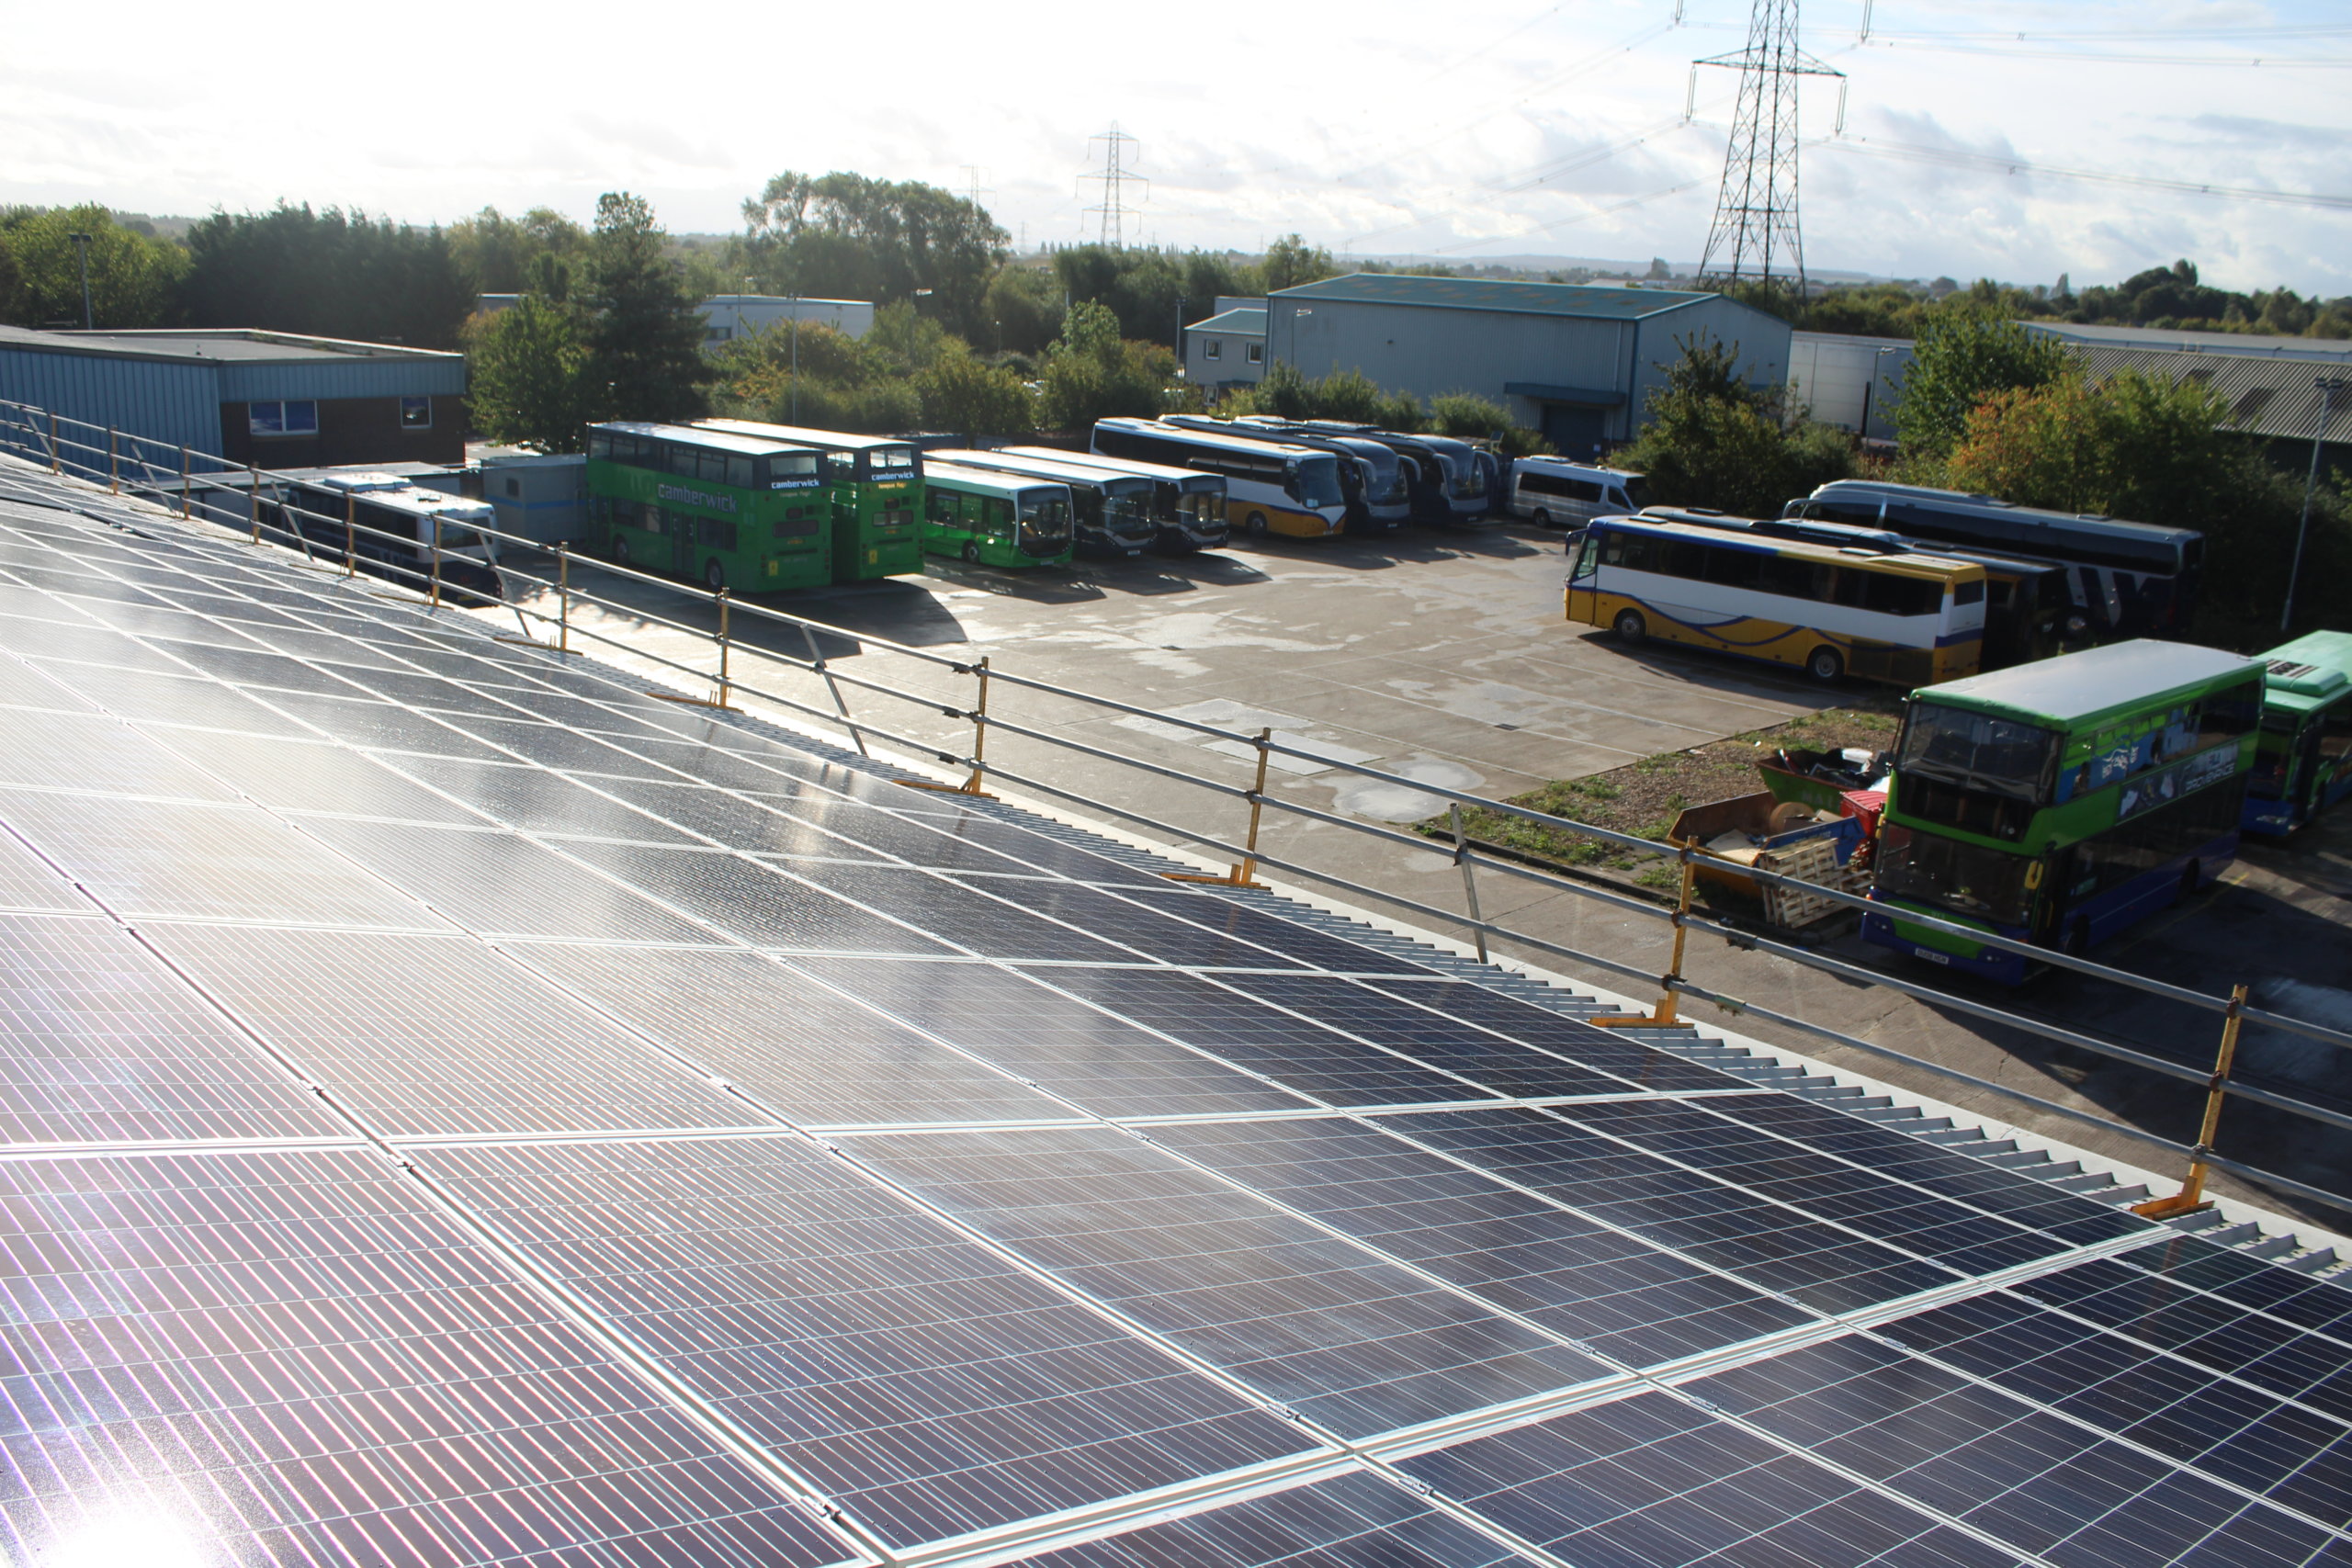 Solar panels on the rooftop of Thames Travel, owned and managed by Low Carbon Hub